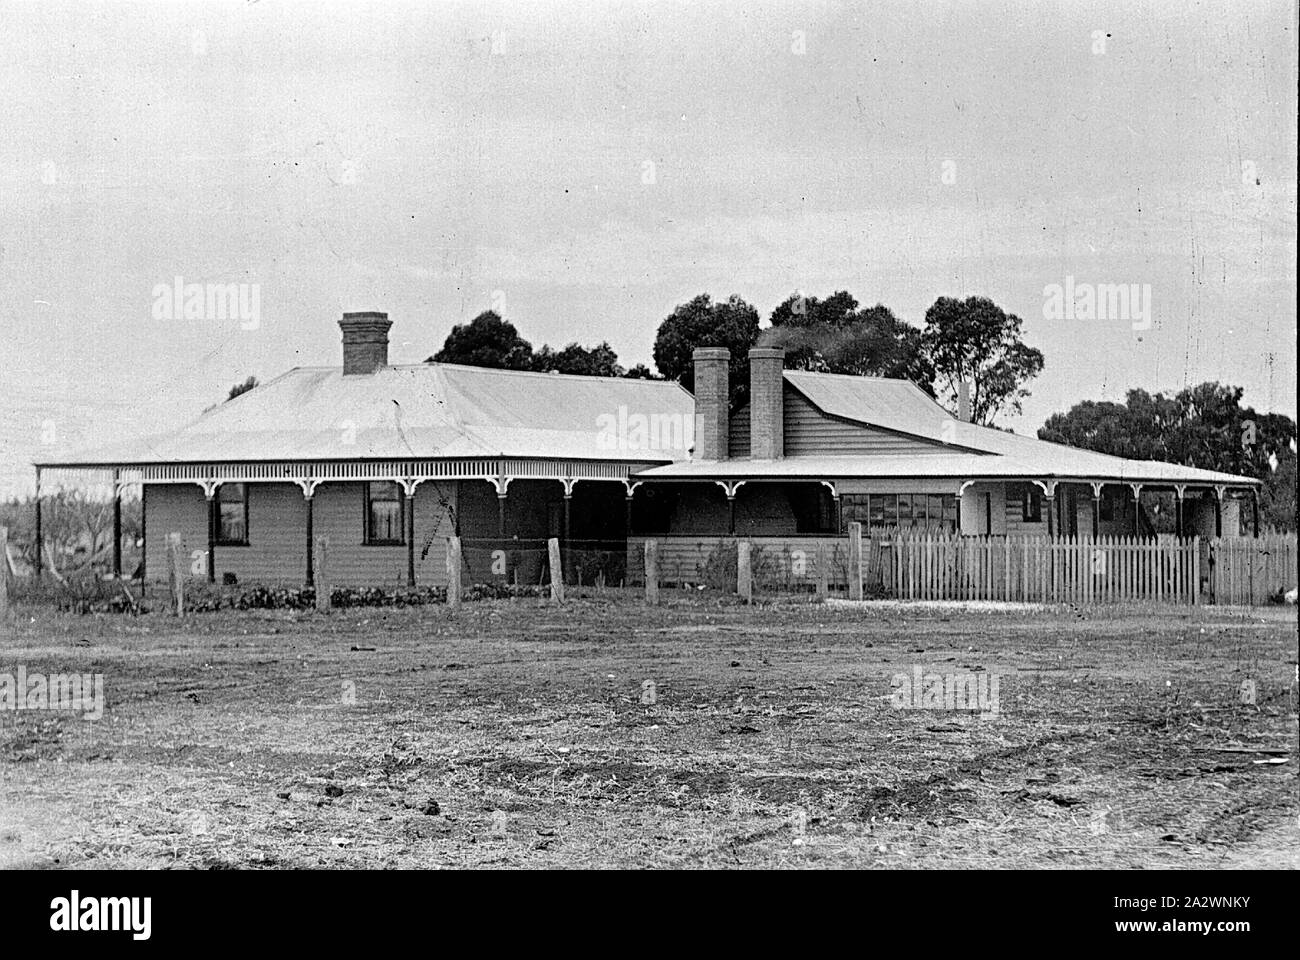 Negative - Cotswold, Maryborough, Victoria, circa 1915, The J. Nicols family home. The house is single storey weatherboard with brick chimneys and sleepouts. It is in a cleared rural area Stock Photo